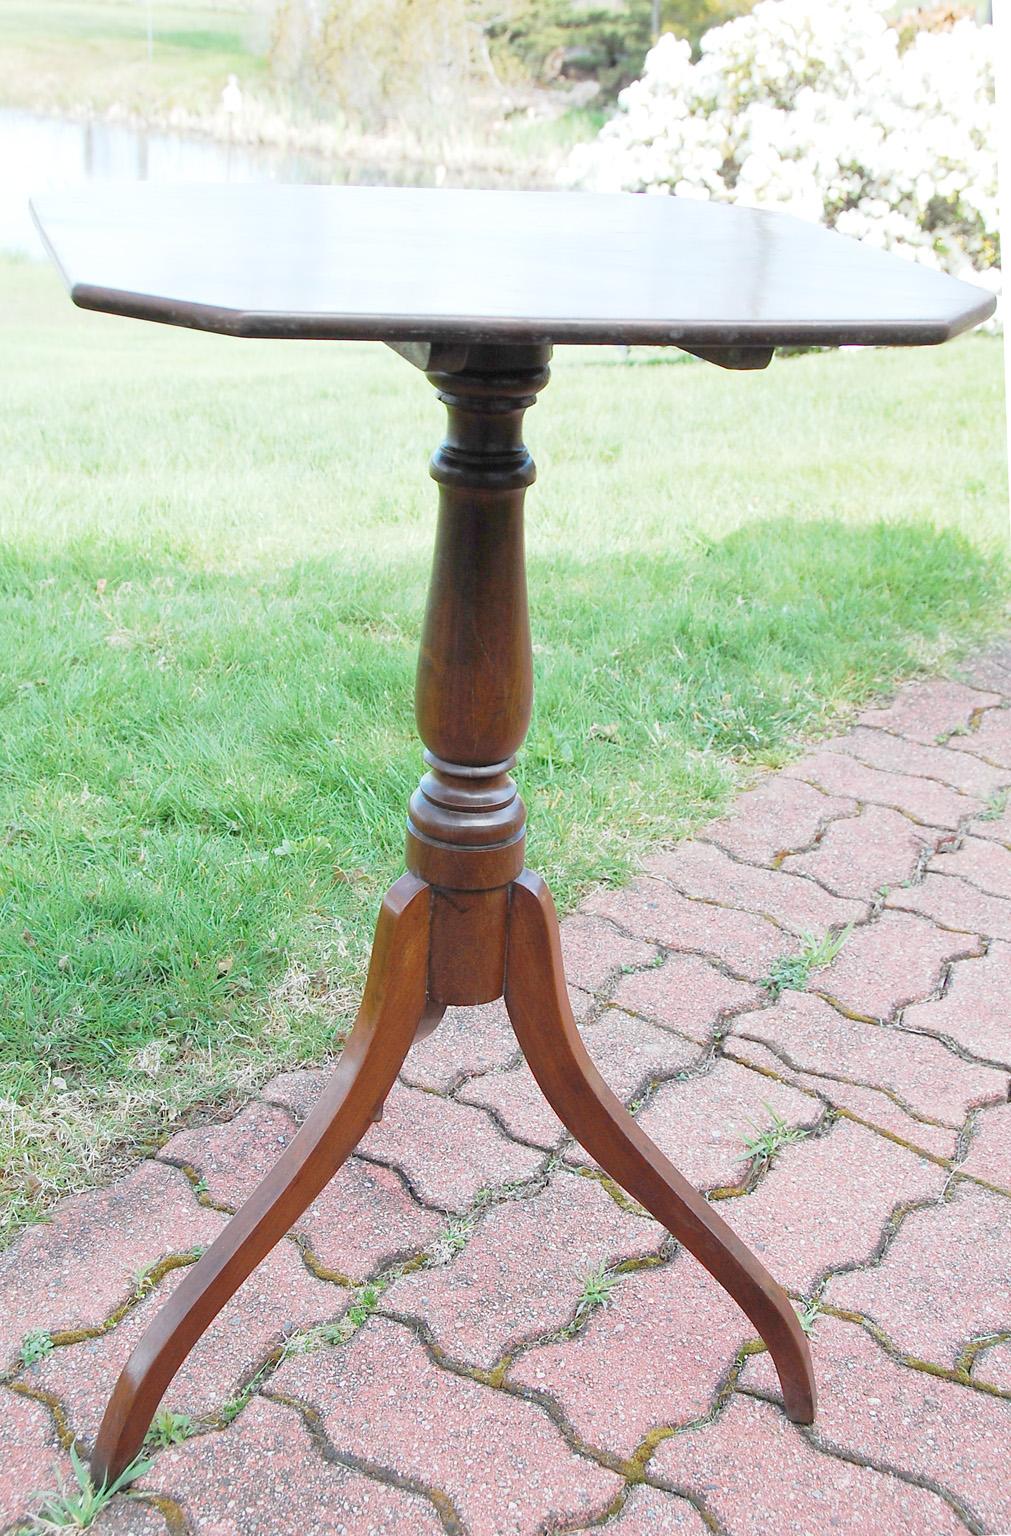 American Early 19th Century Tilt Top Candle Stand in Mahogany with Tripod Base 2